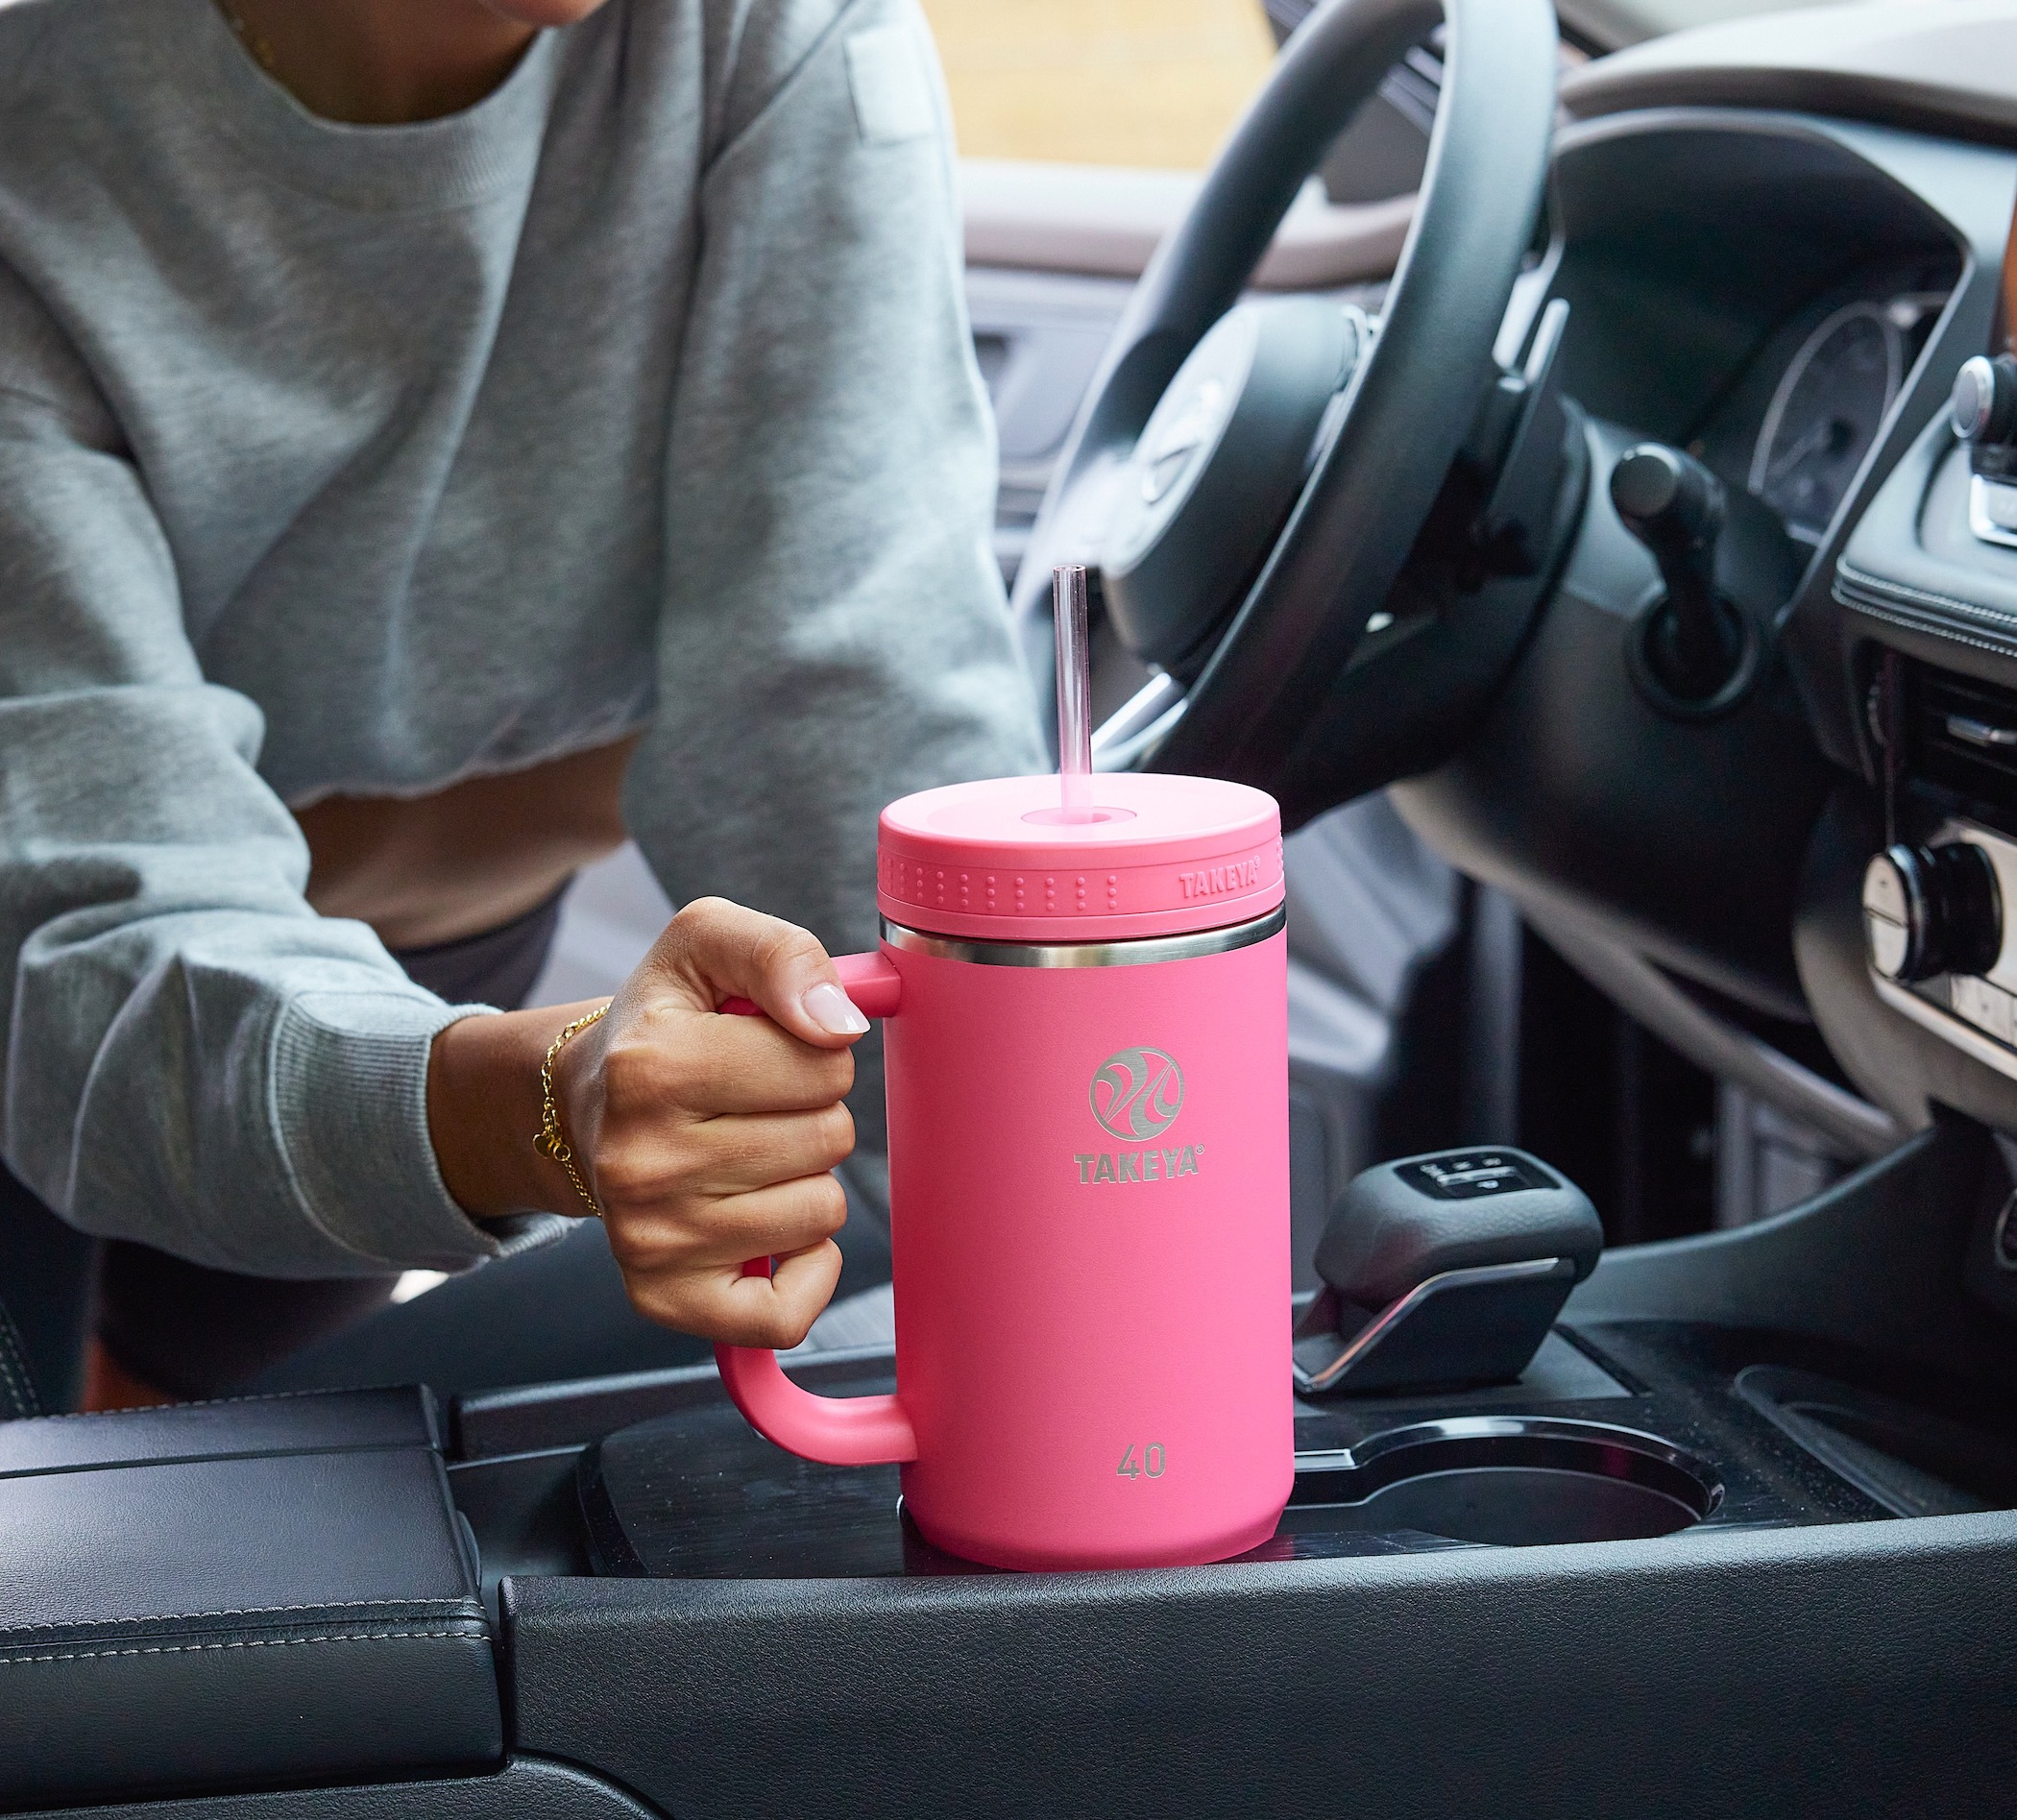 Hydro Flask 40 oz All Around Travel Tumbler in Pink